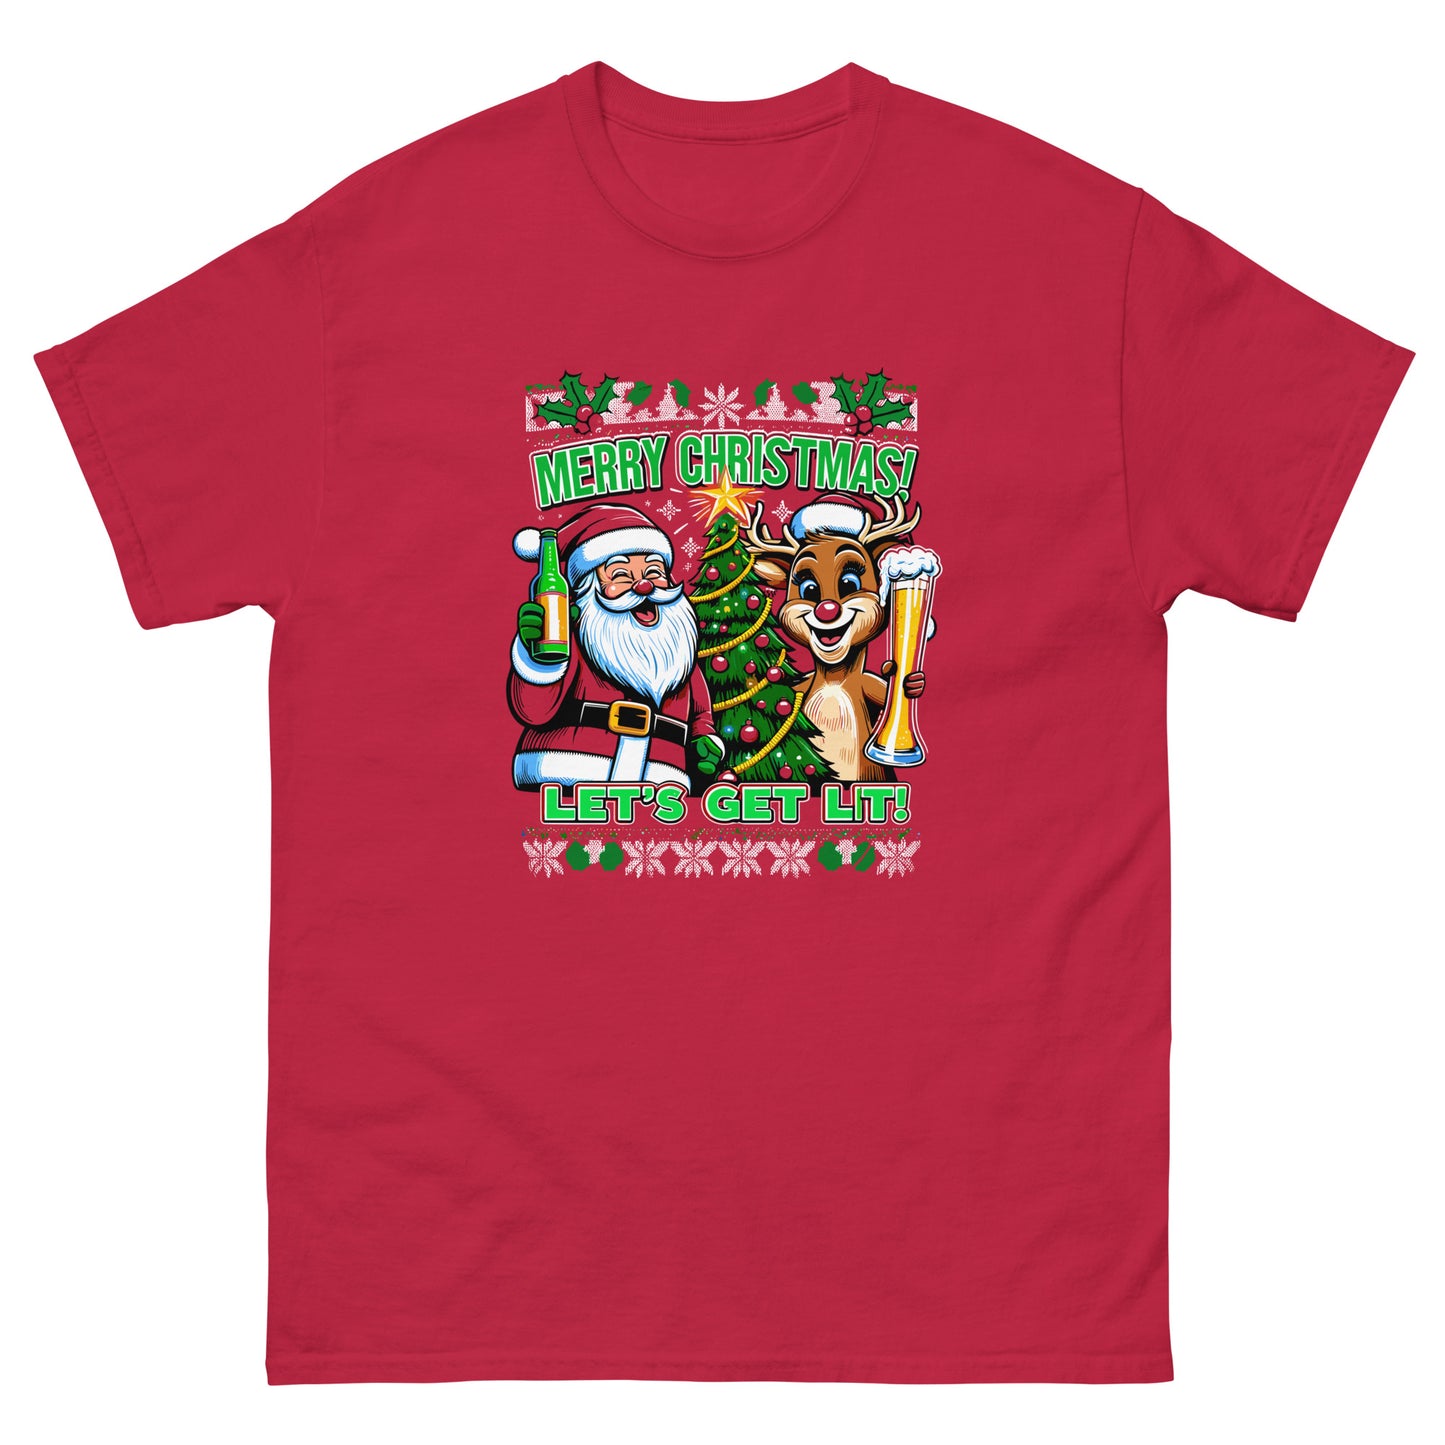 Merry Christmas lets get lit with santa and rudolf printed ugly christmas t-shirt by Whistler Shirts